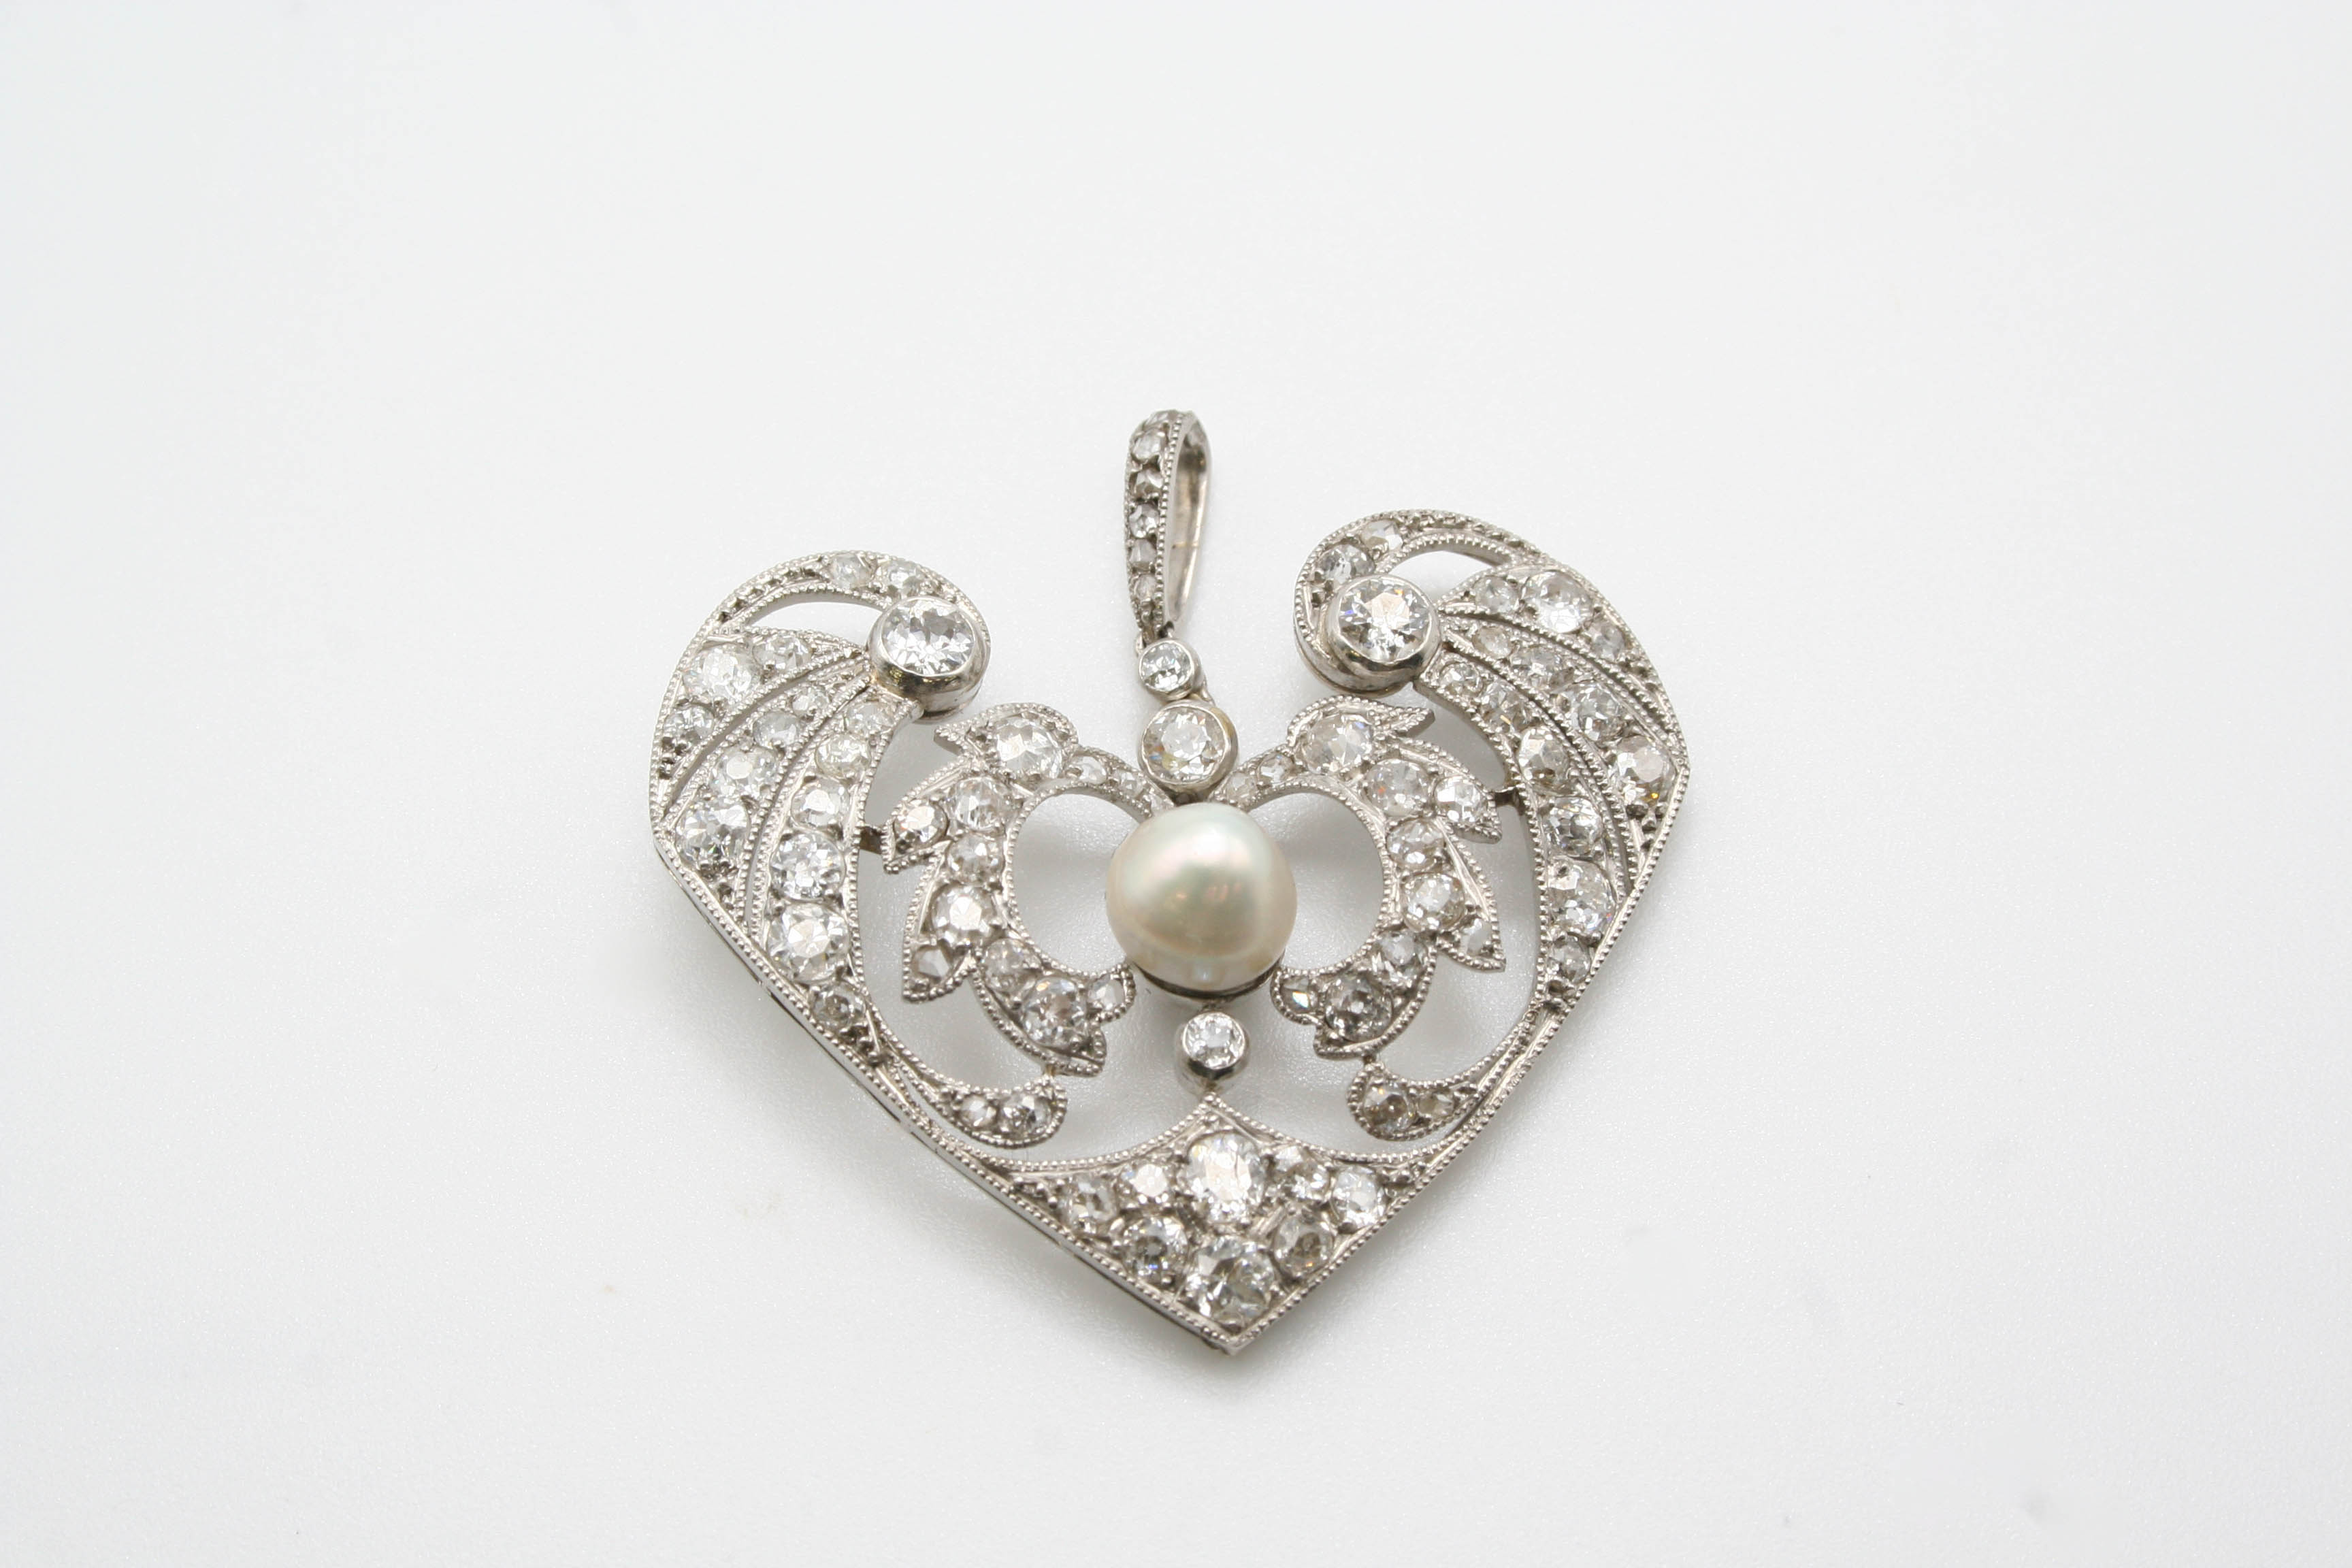 AN ART DECO DIAMOND AND PEARL PENDANT the openwork foliate scrolling mount is set with graduated old